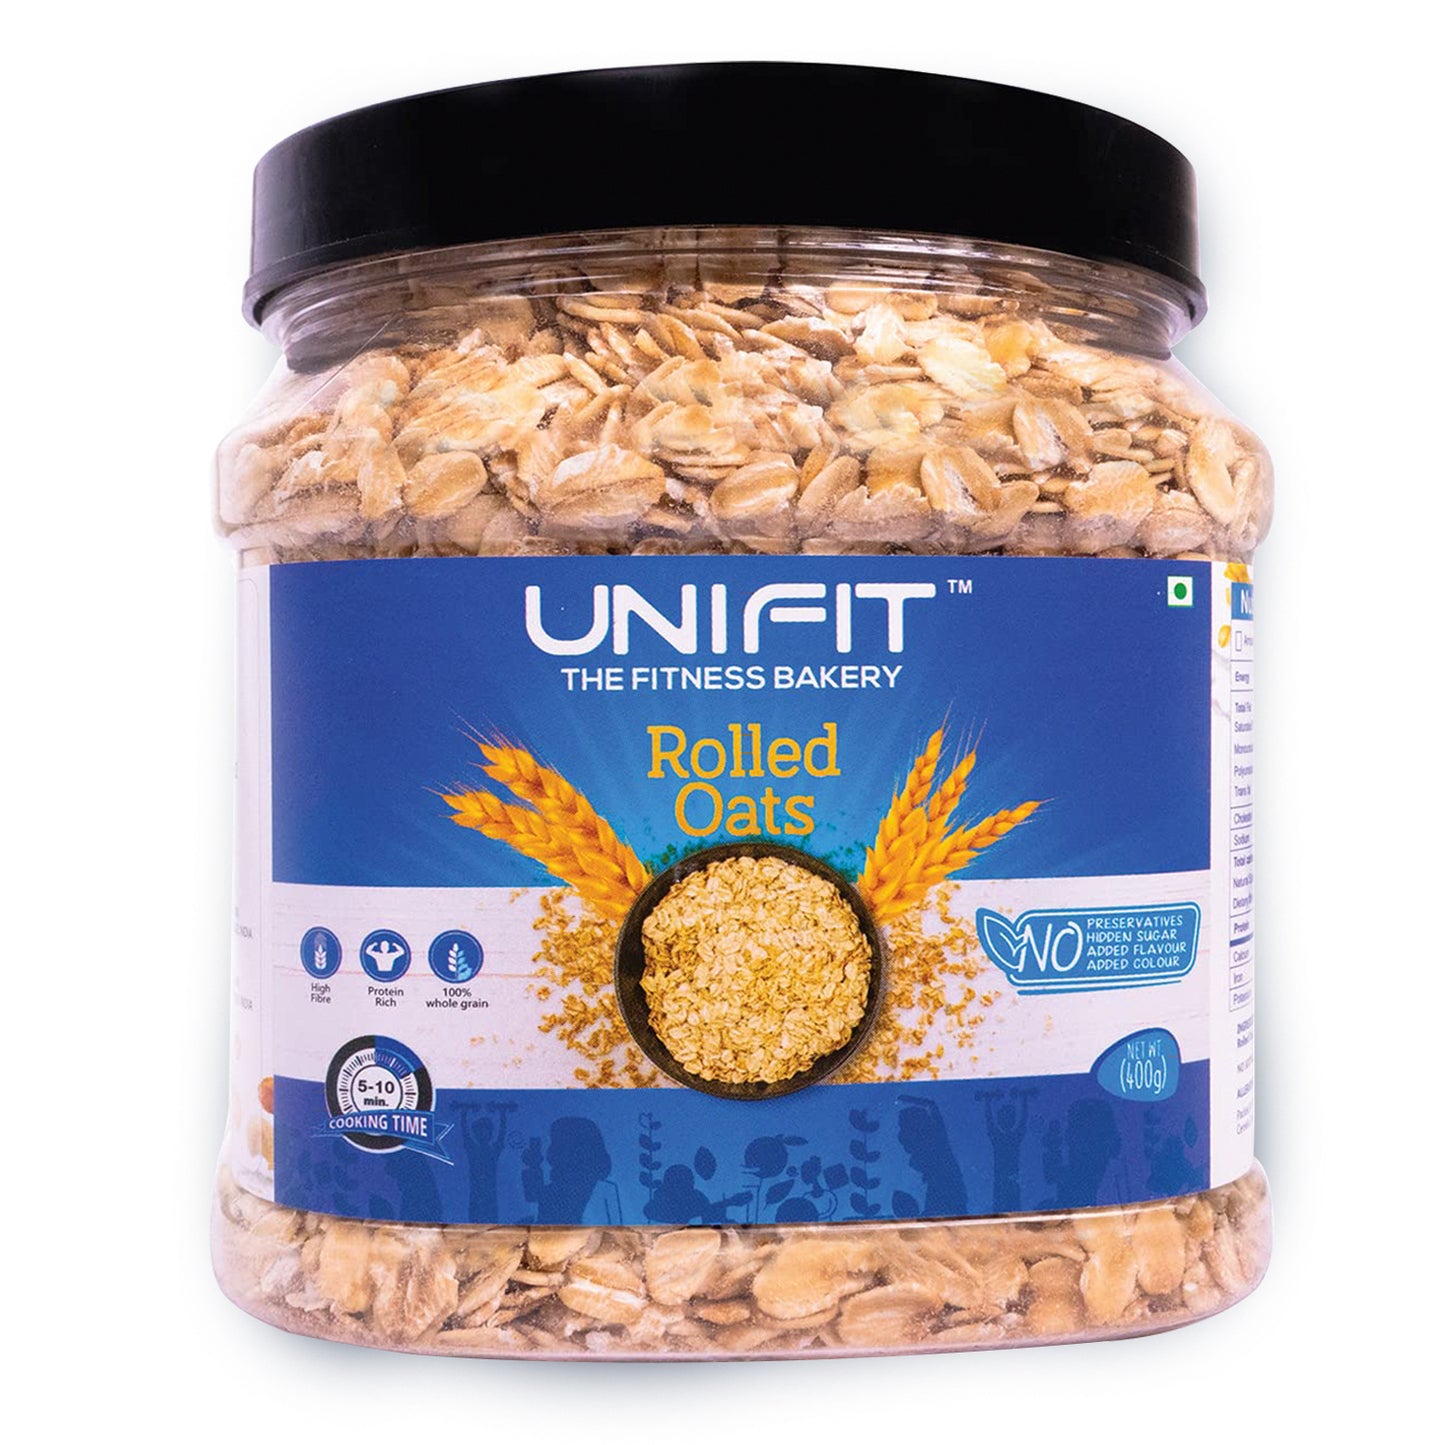 UNIFIT Rolled Oats